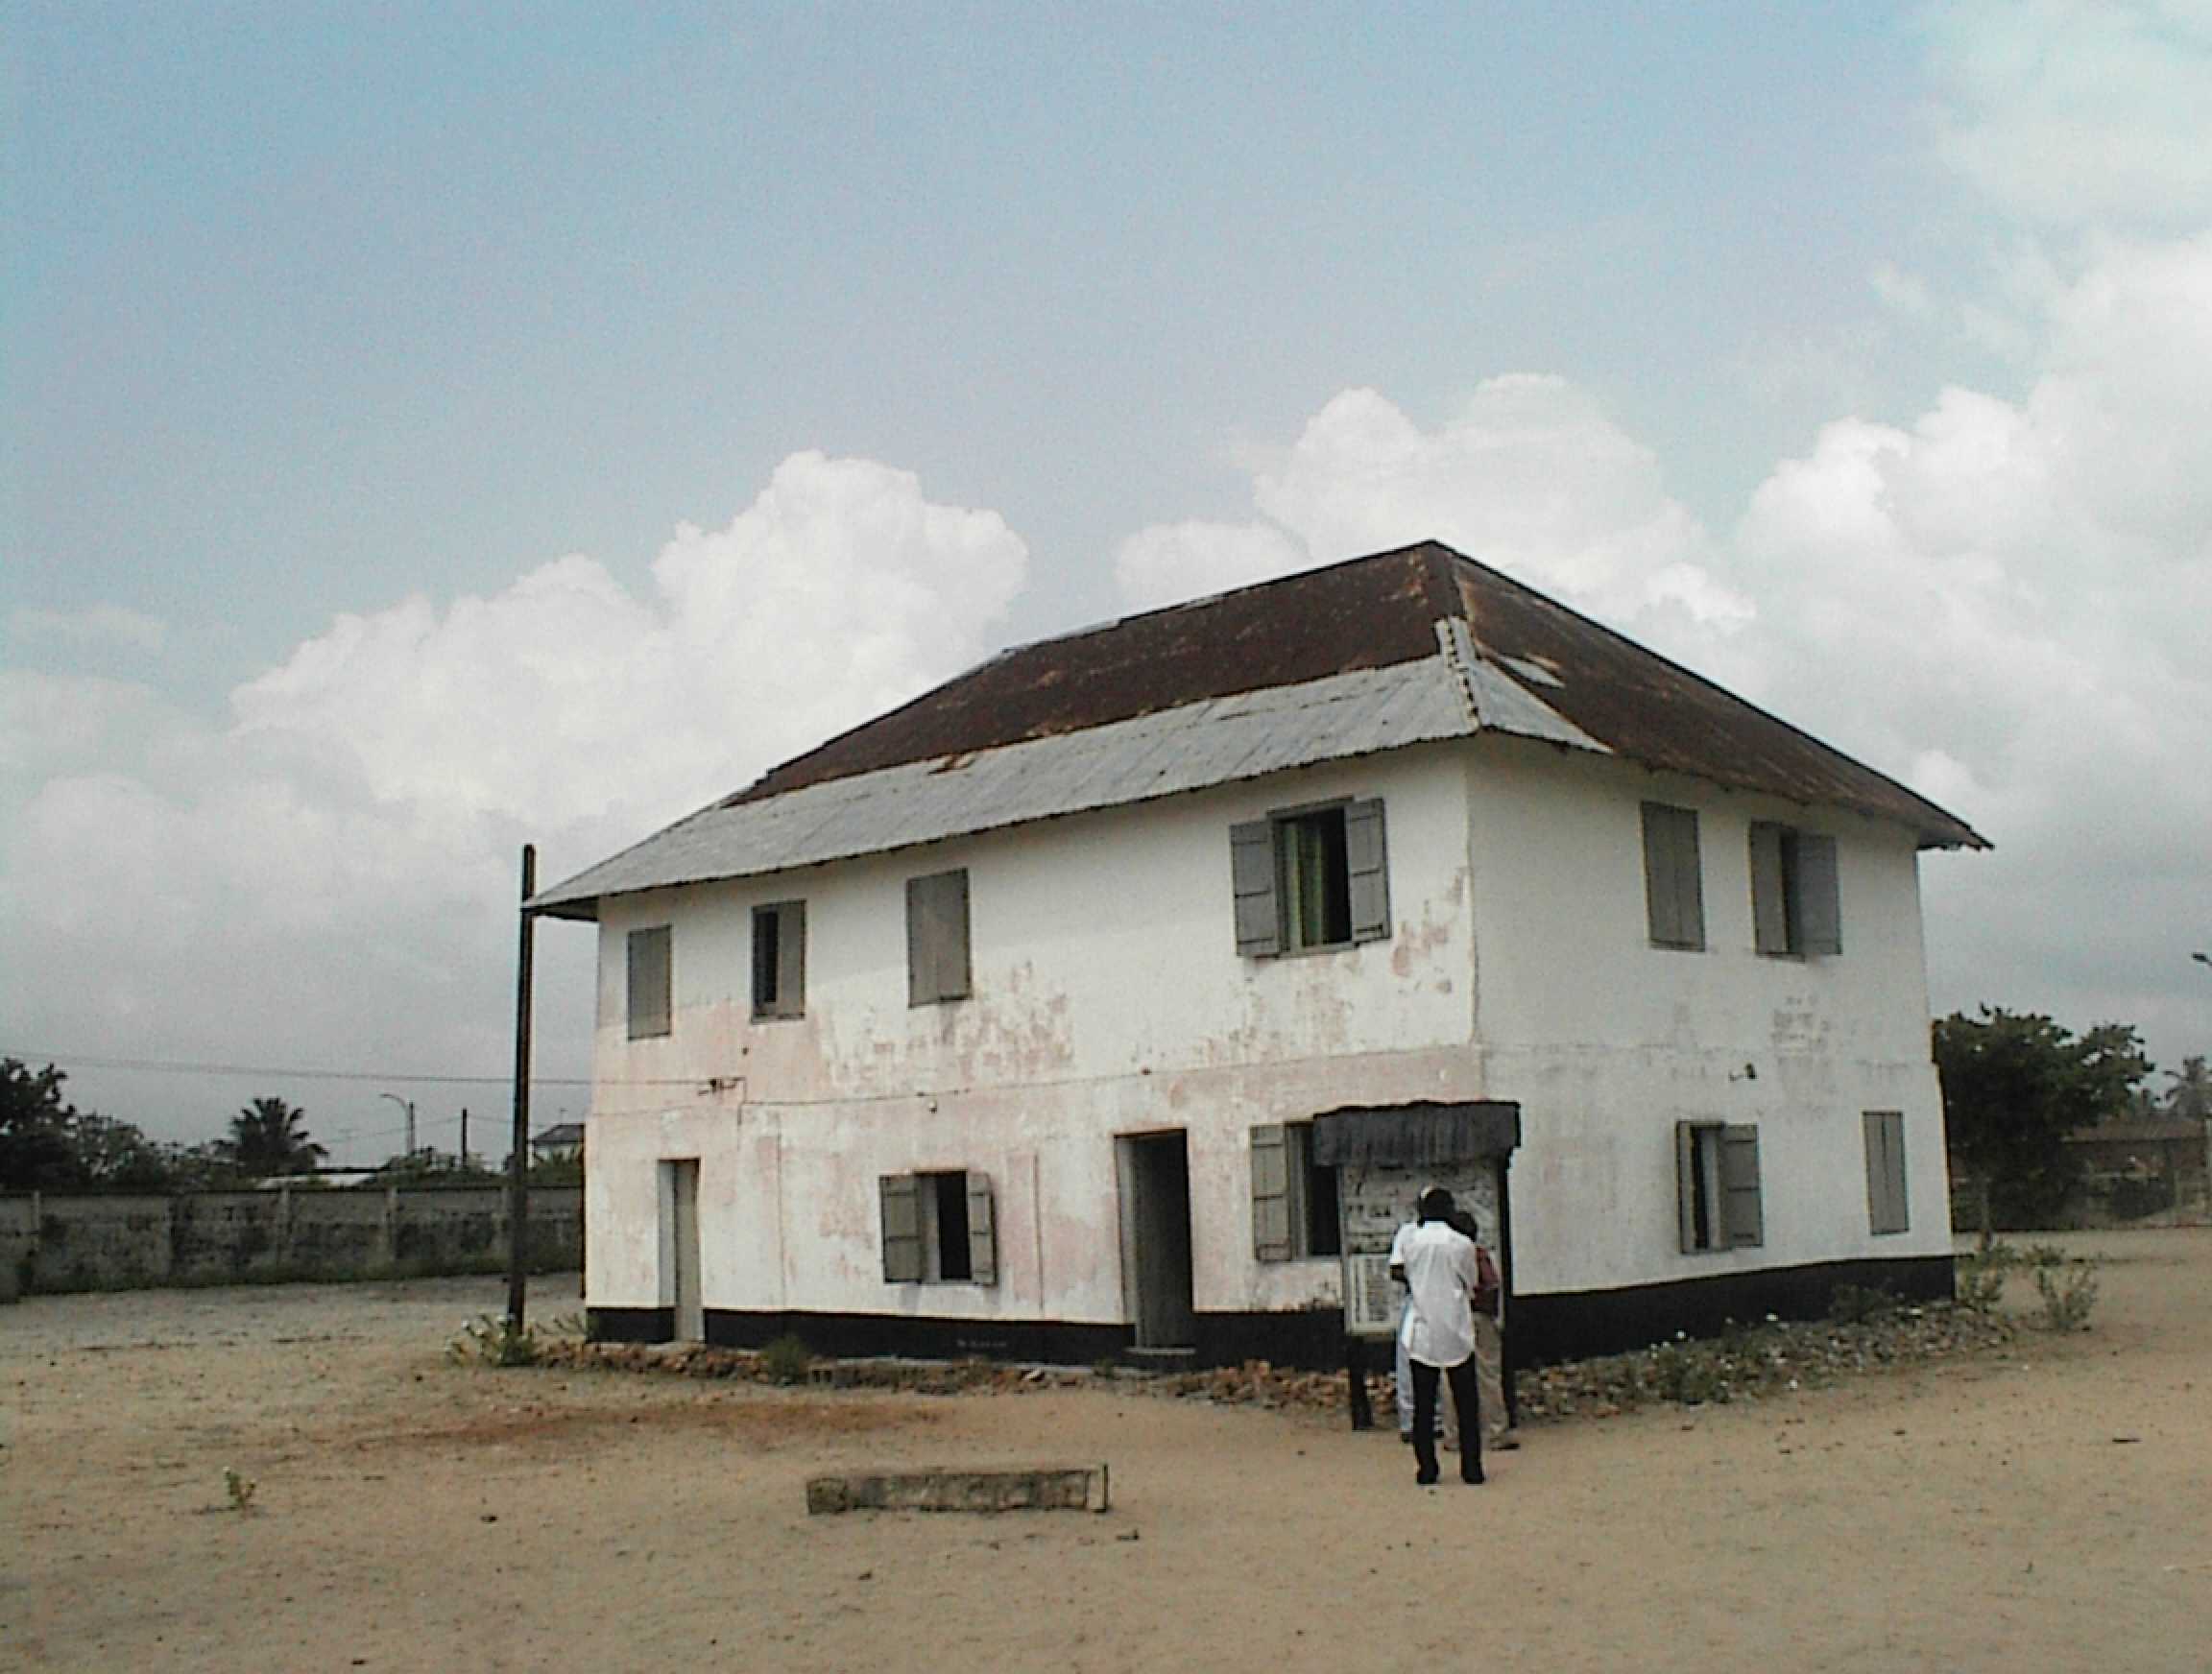 The first multi-storied building in Nigeria, and the first Anglican mission house